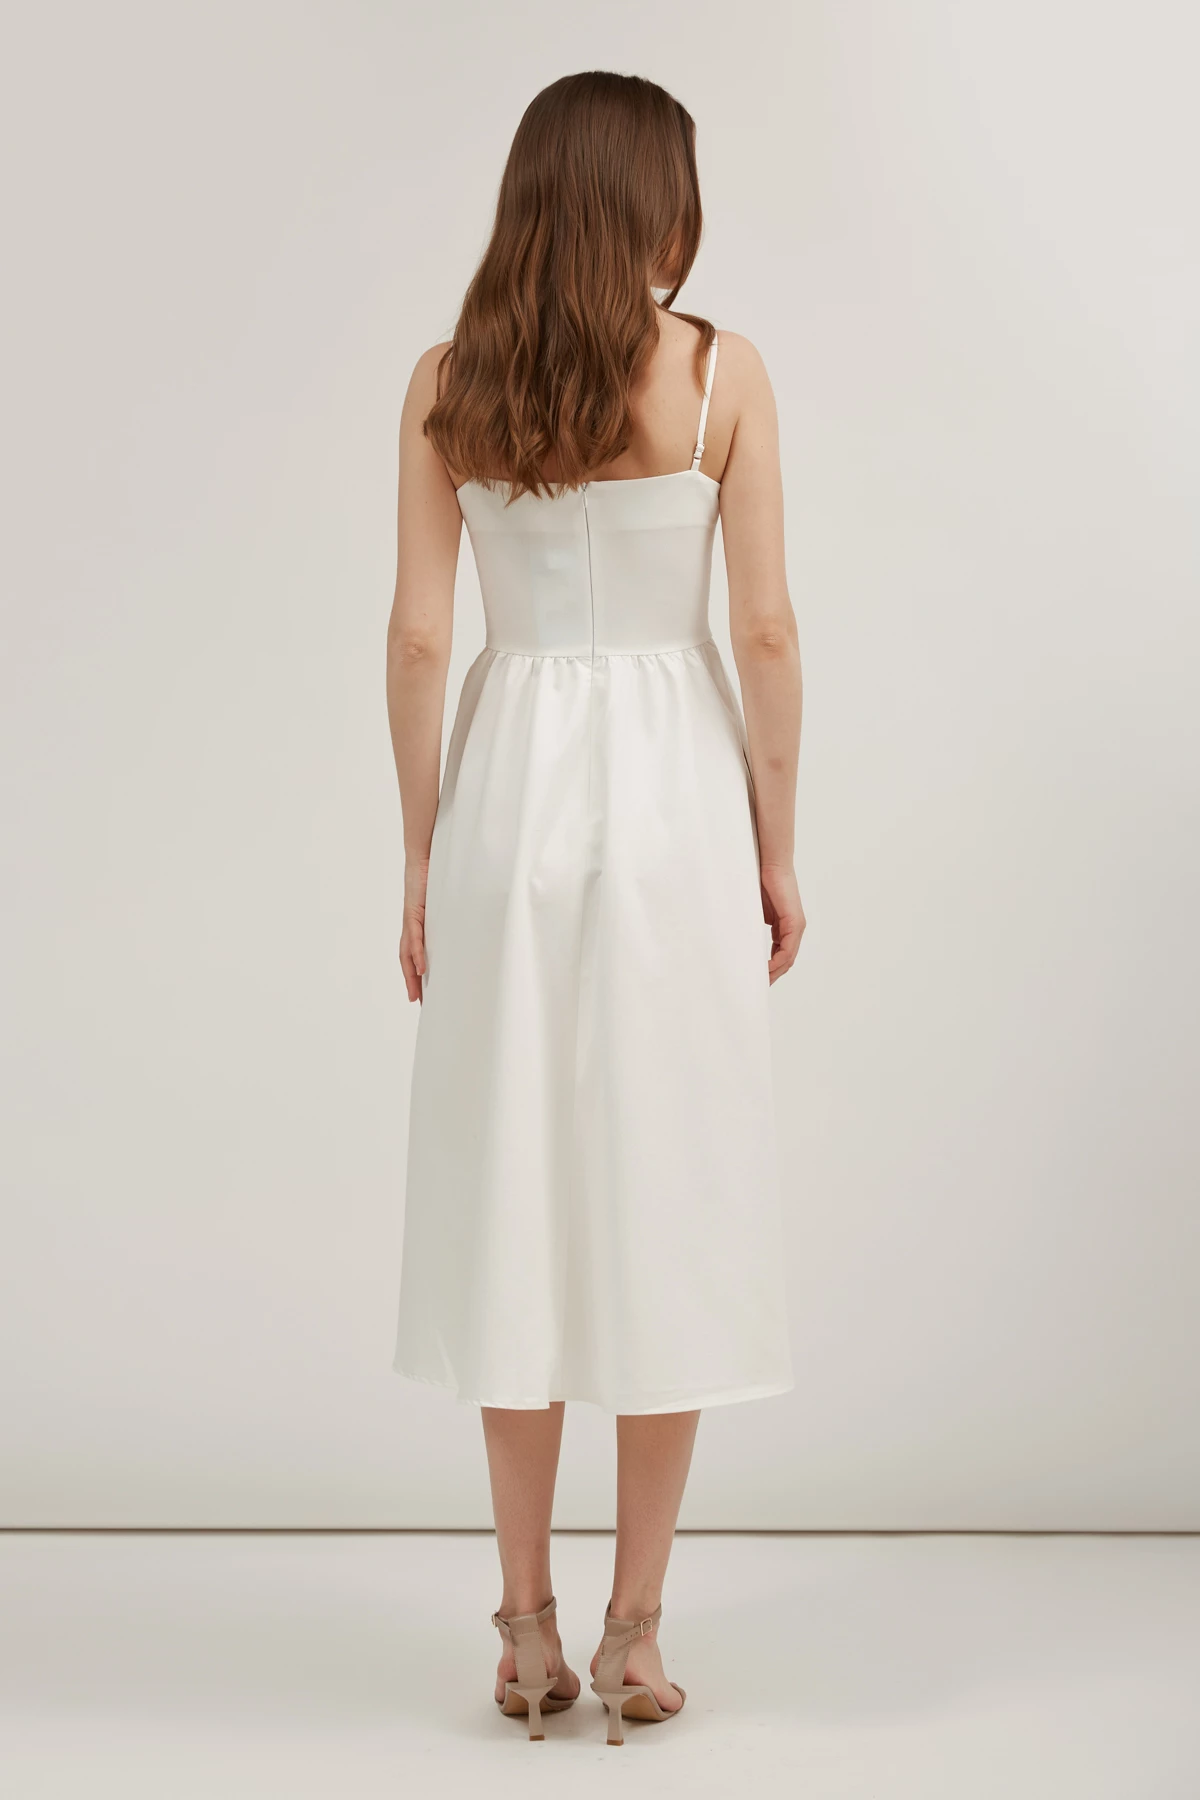 Milky waist-fitted midi dress made of suit fabric, photo 5